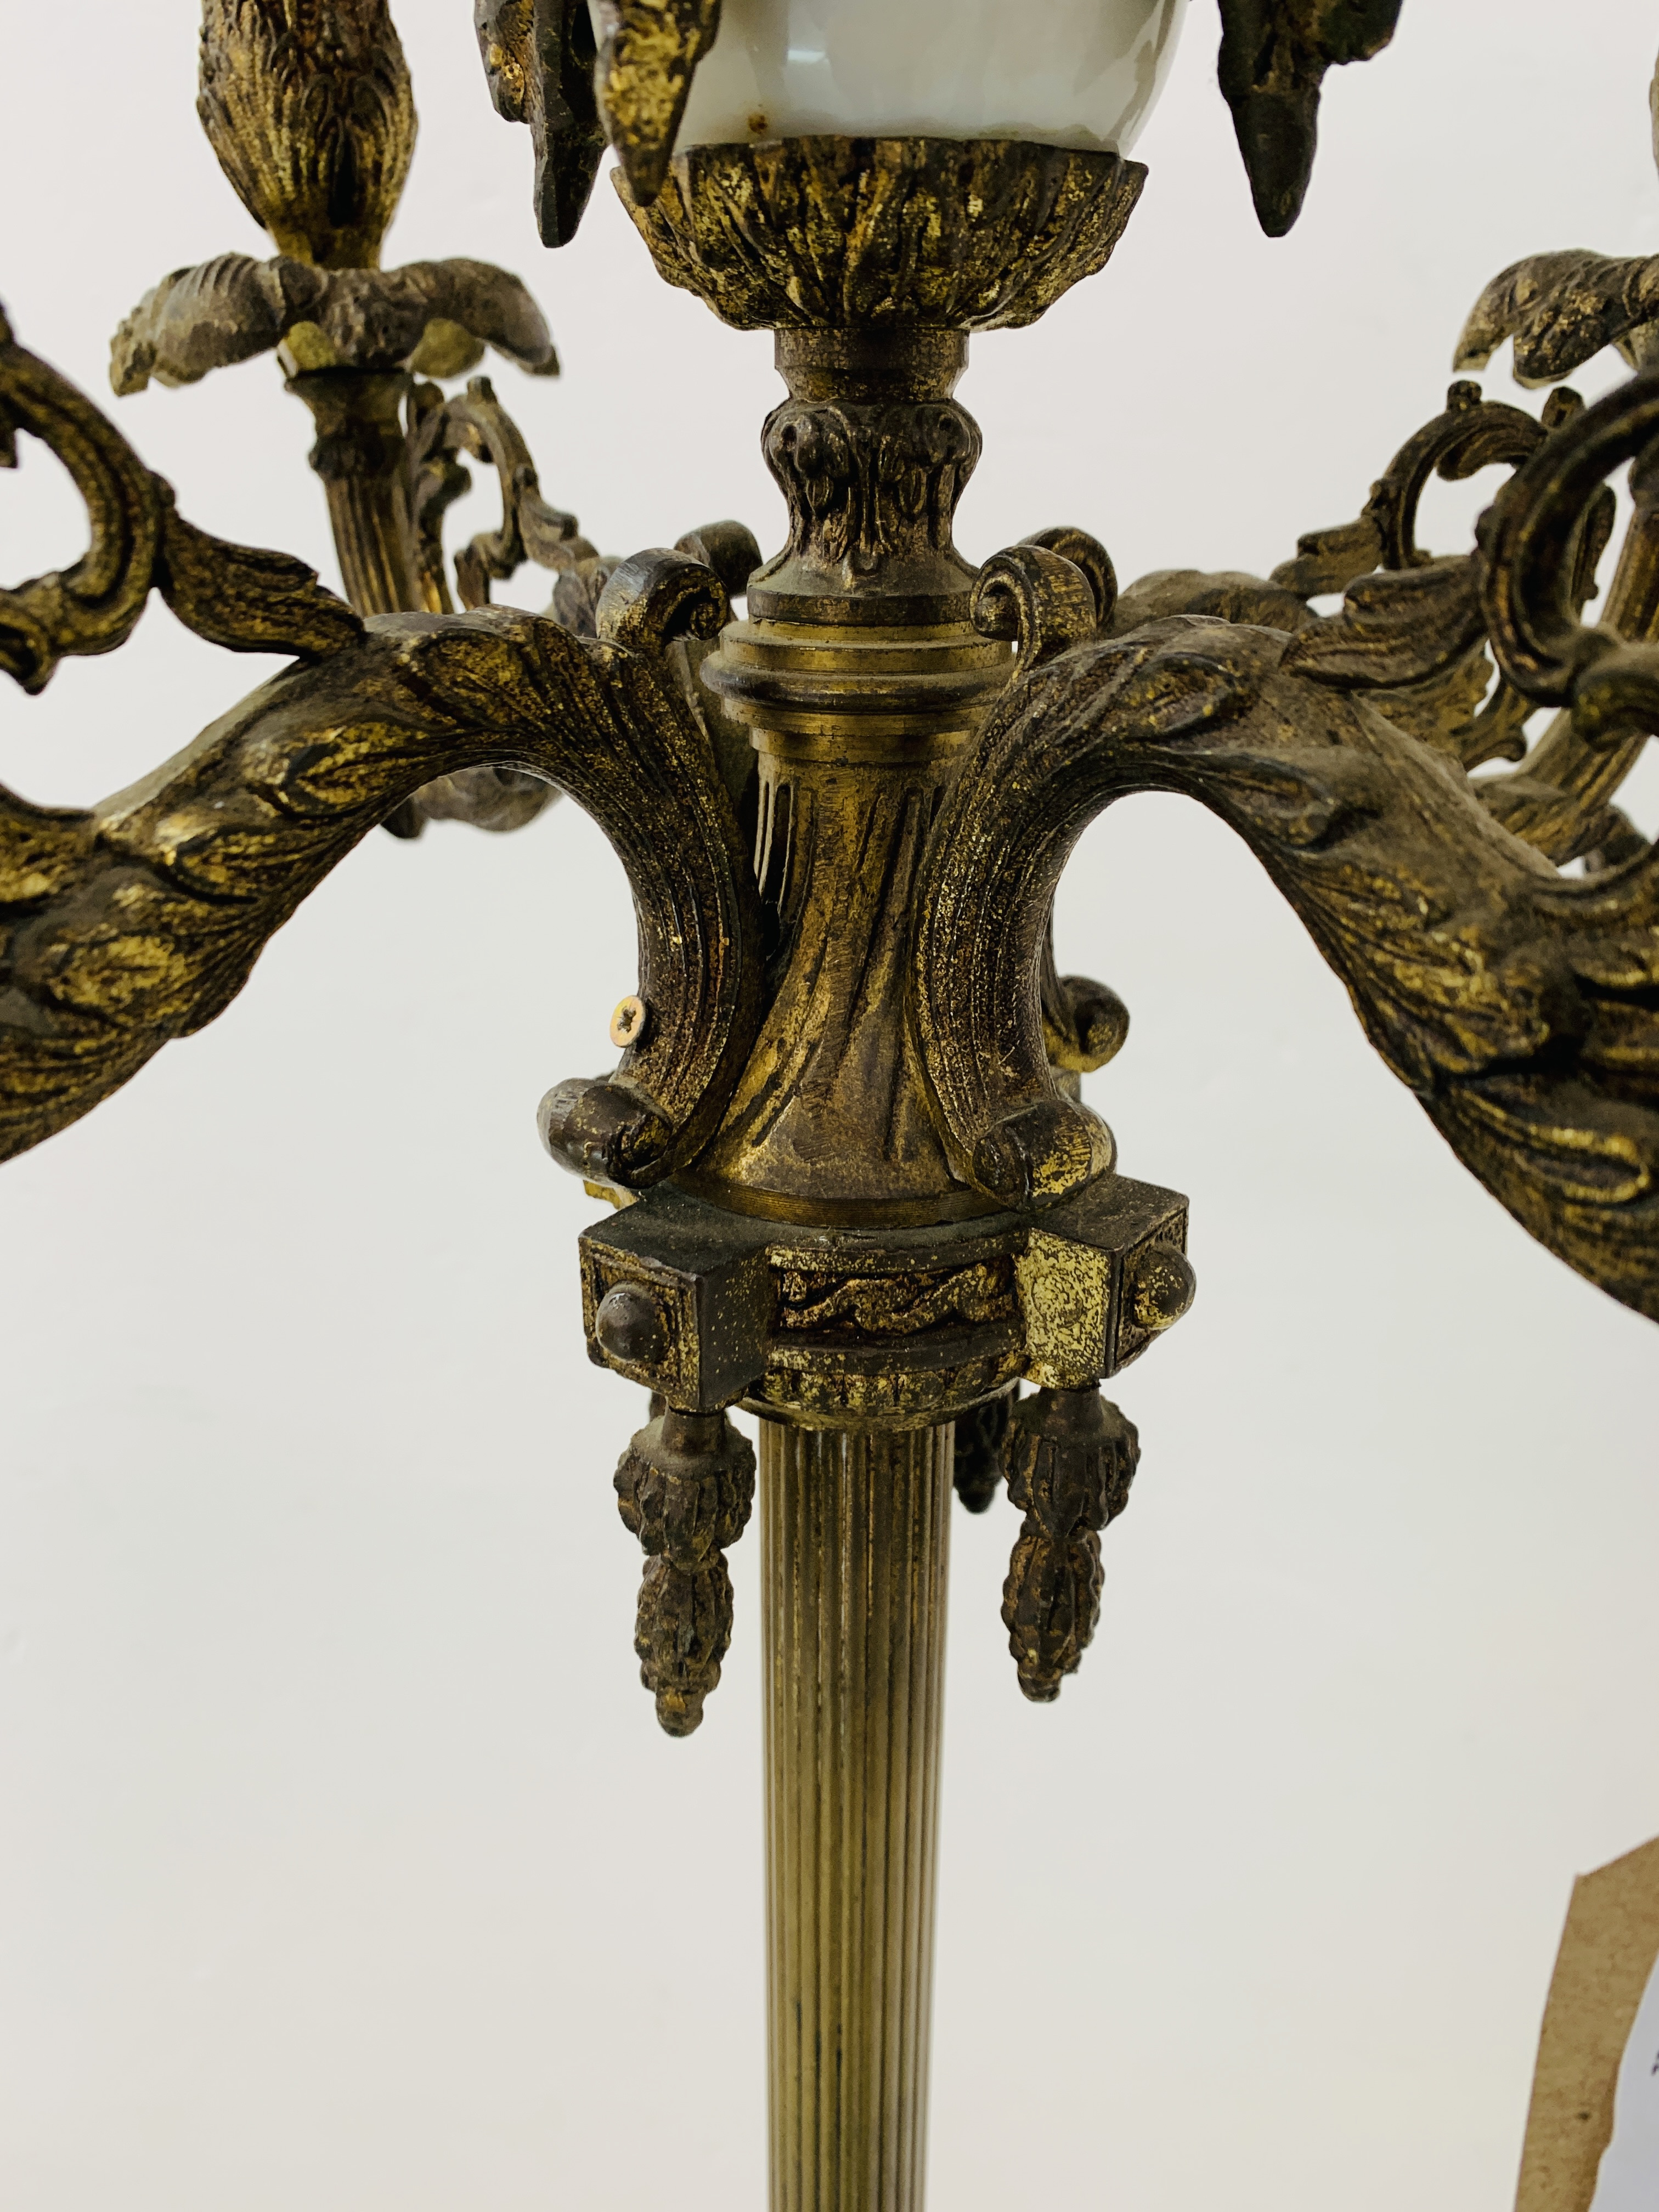 A CORINTHIAN COLUMN FLOOR STANDING FIVE BRANCH LAMP STANDARD THE BASE WITH MARBLE PLATFORM AND CLAW - Image 5 of 12